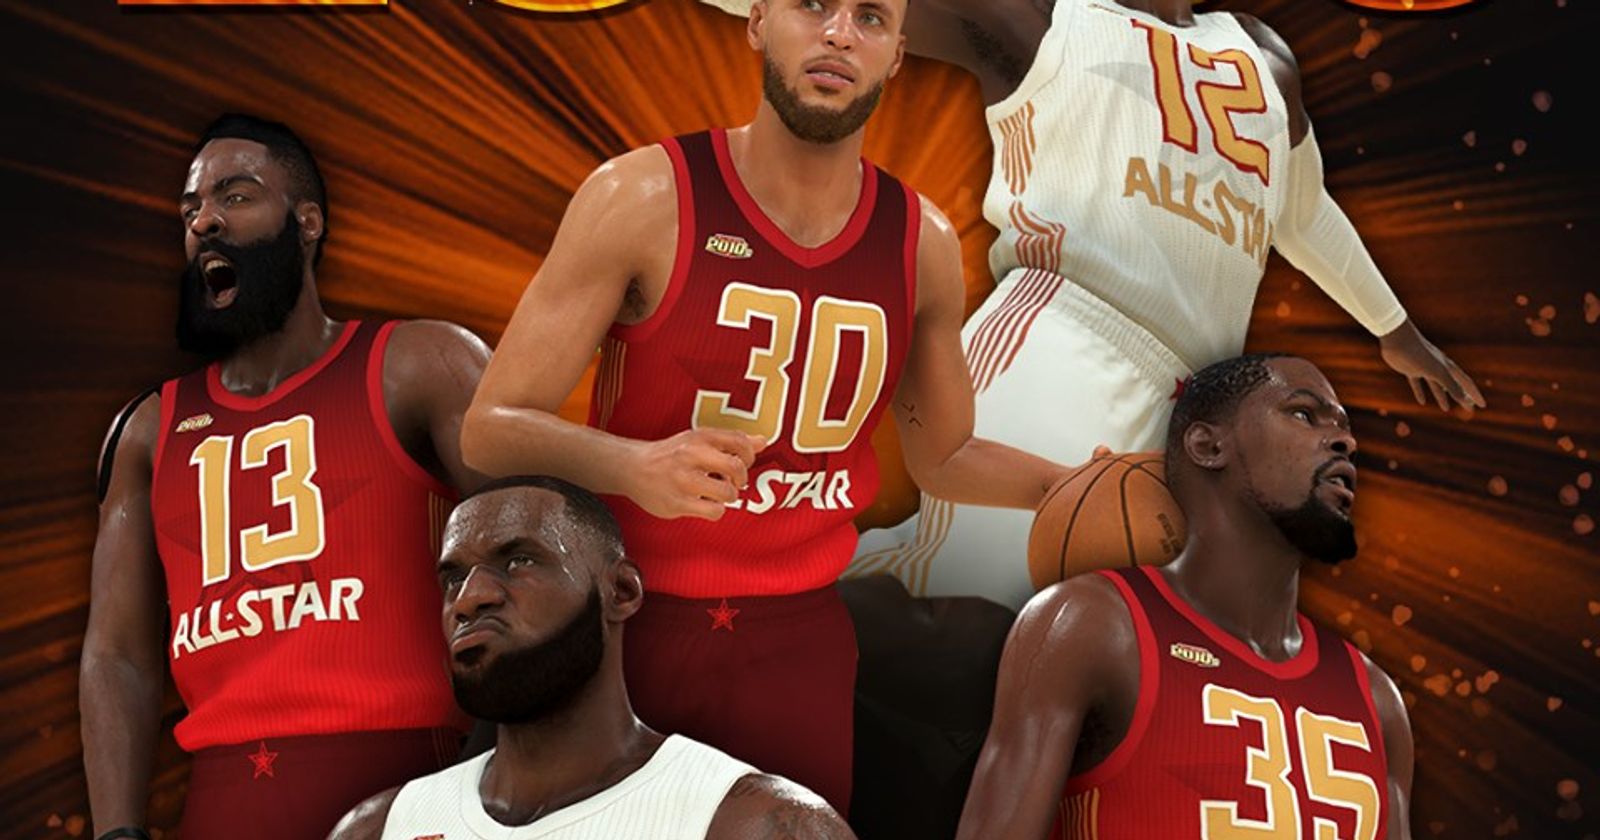 NBA 2K20: All-Decade Teams & Ratings Unveiled - Jordan, Kareem, Shaquille,  LeBron, Bryant, Harden, Curry & more